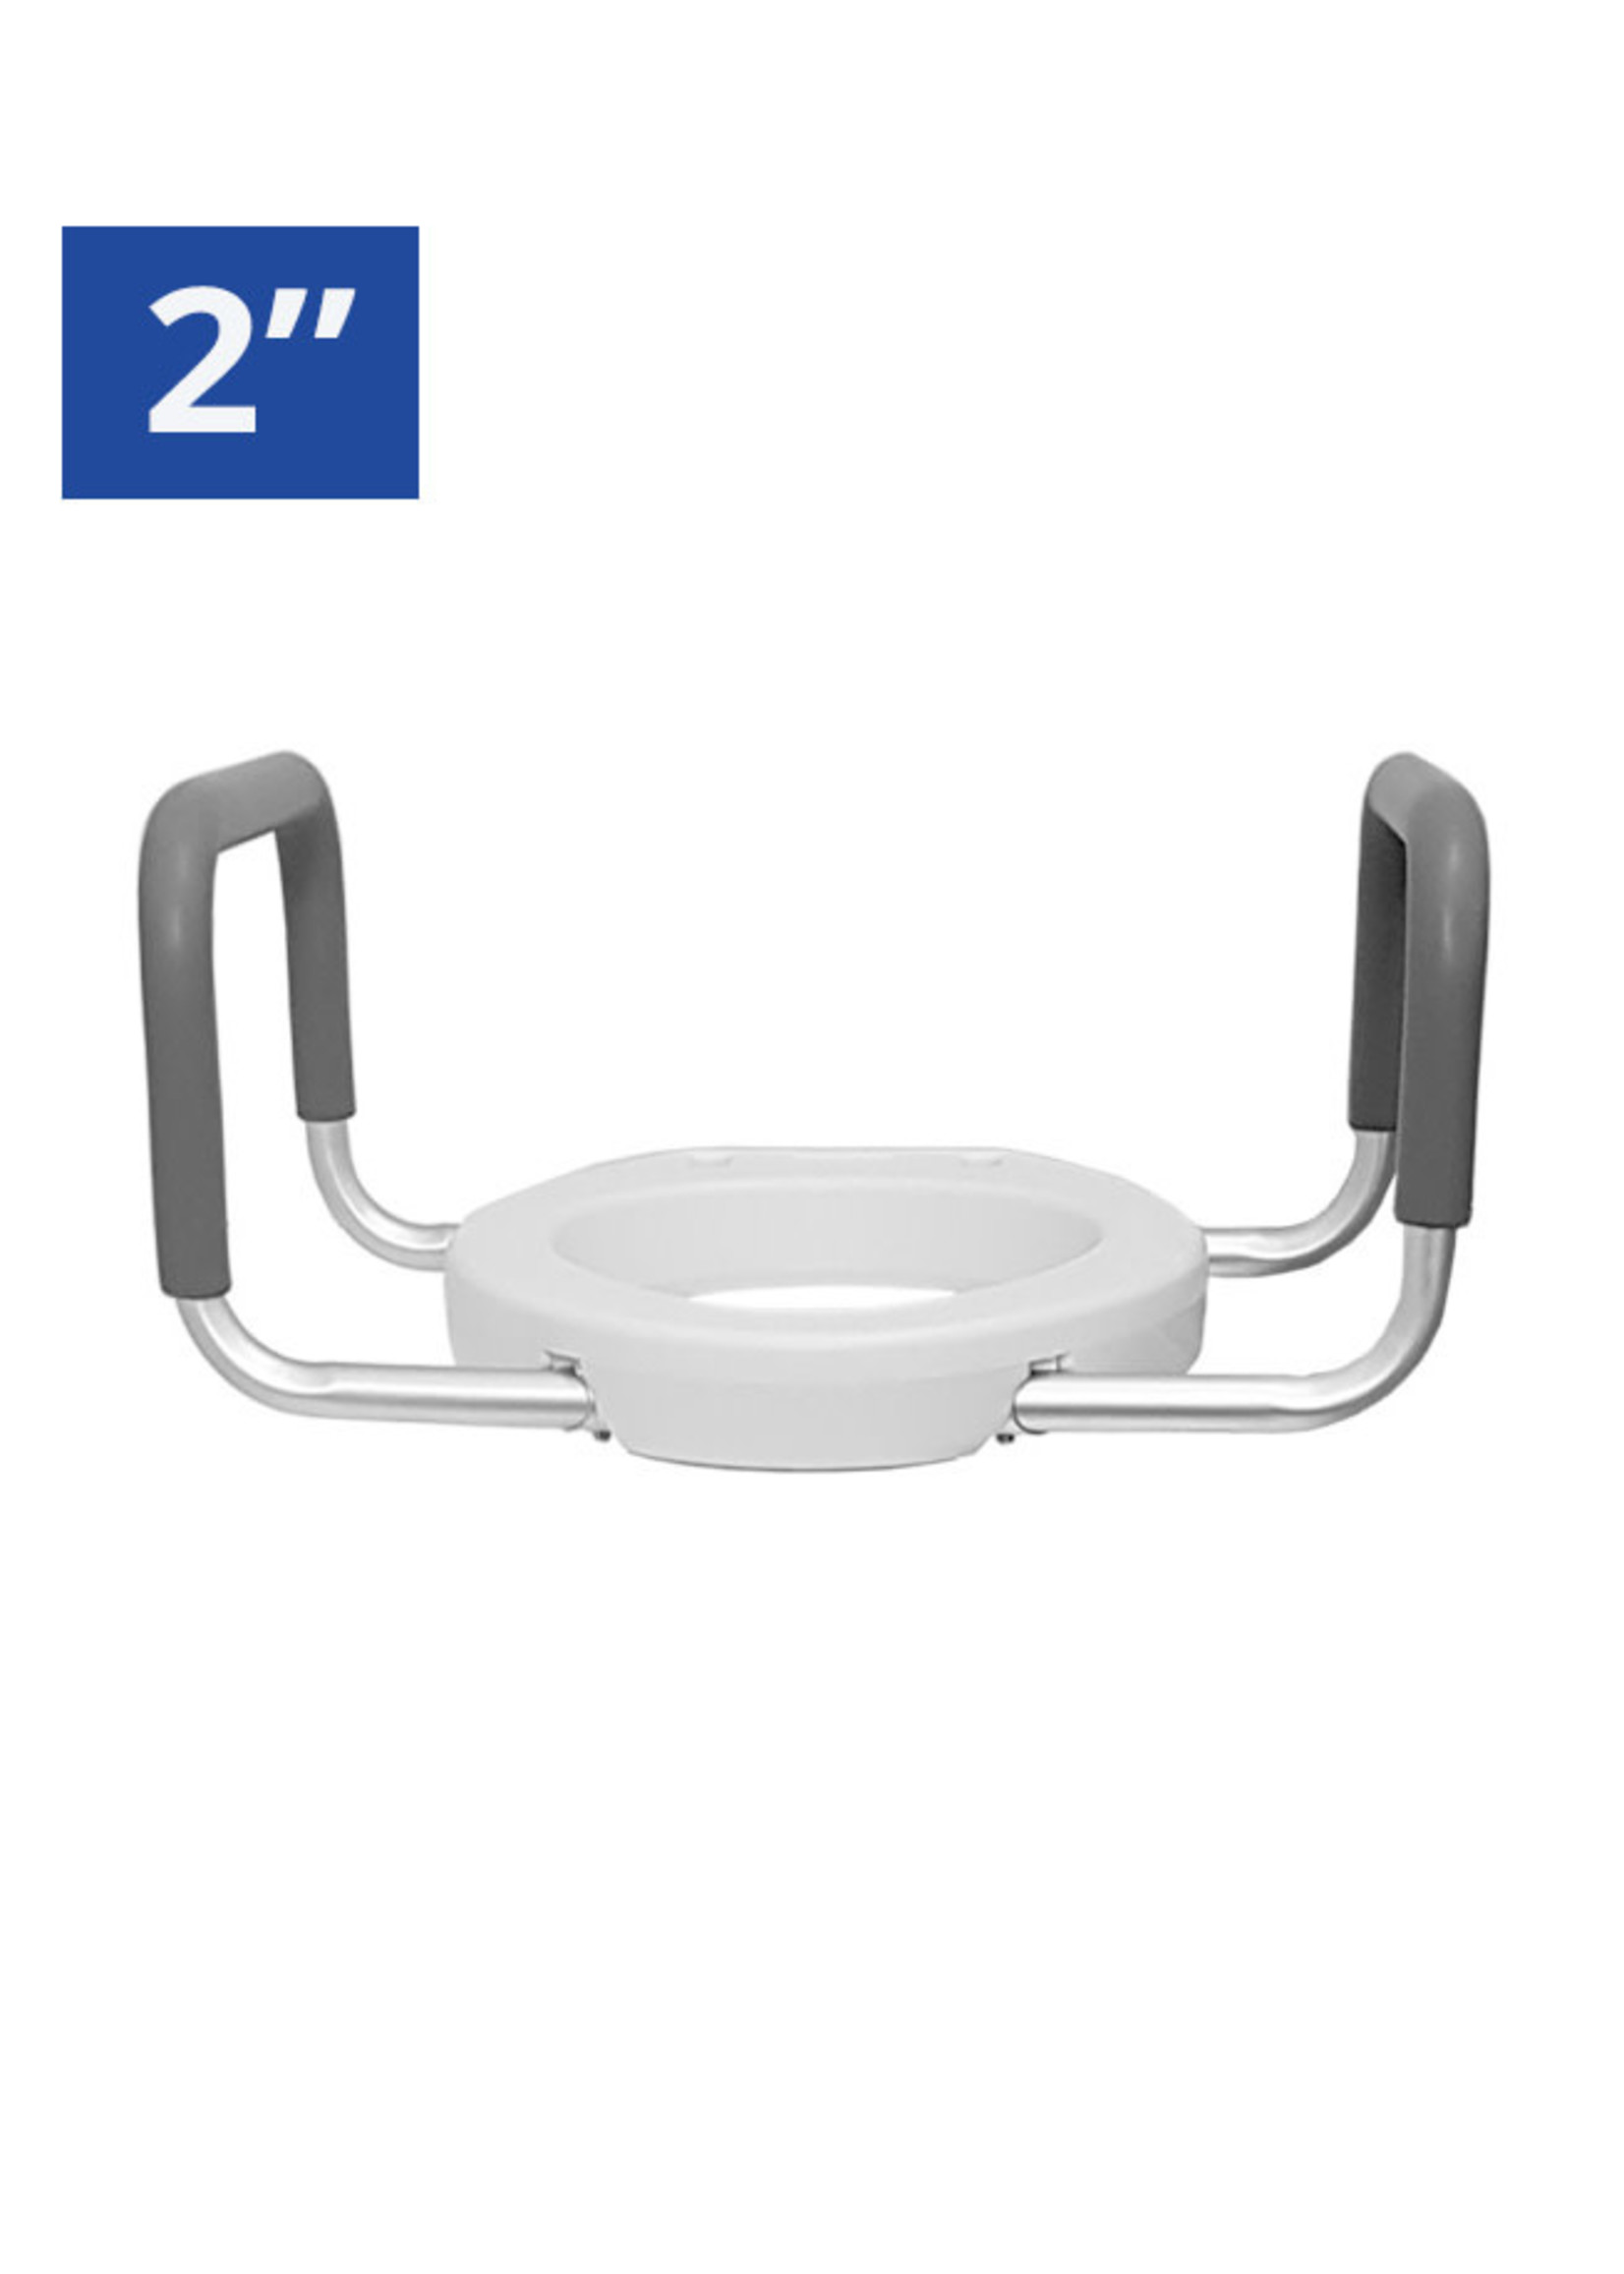 MOBB 2” Elongated Raised Toilet Seat with Arms